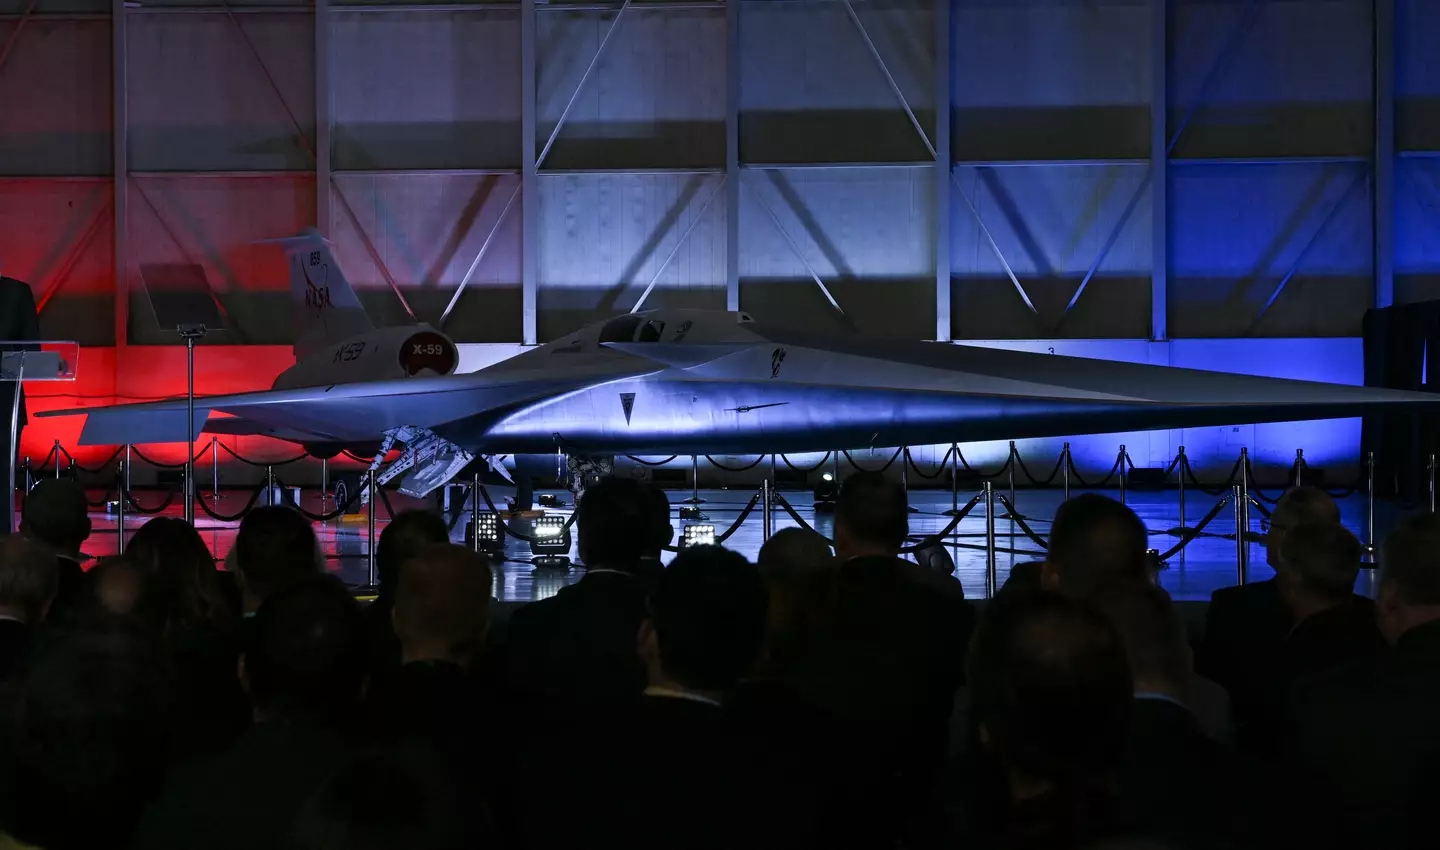 The X-59 was unveiled by NASA and Lockheed Martin.